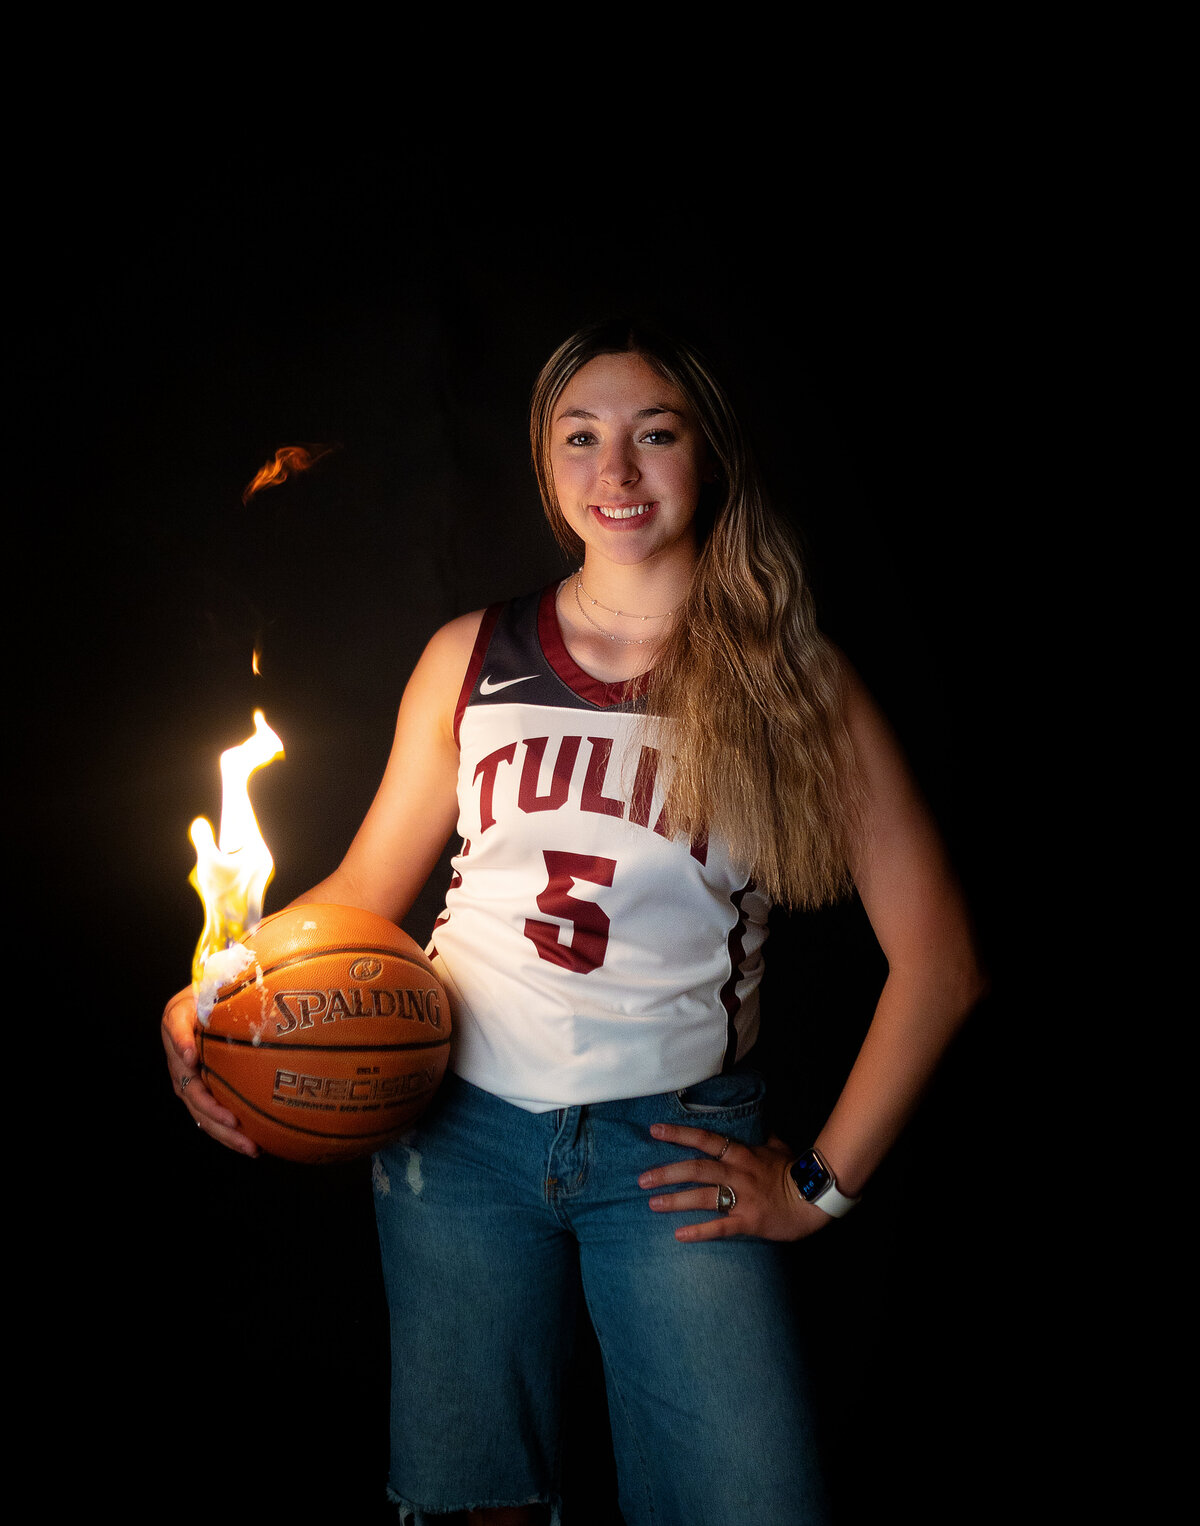 In studio session with high school varsity basketball player while the ball is on fire.